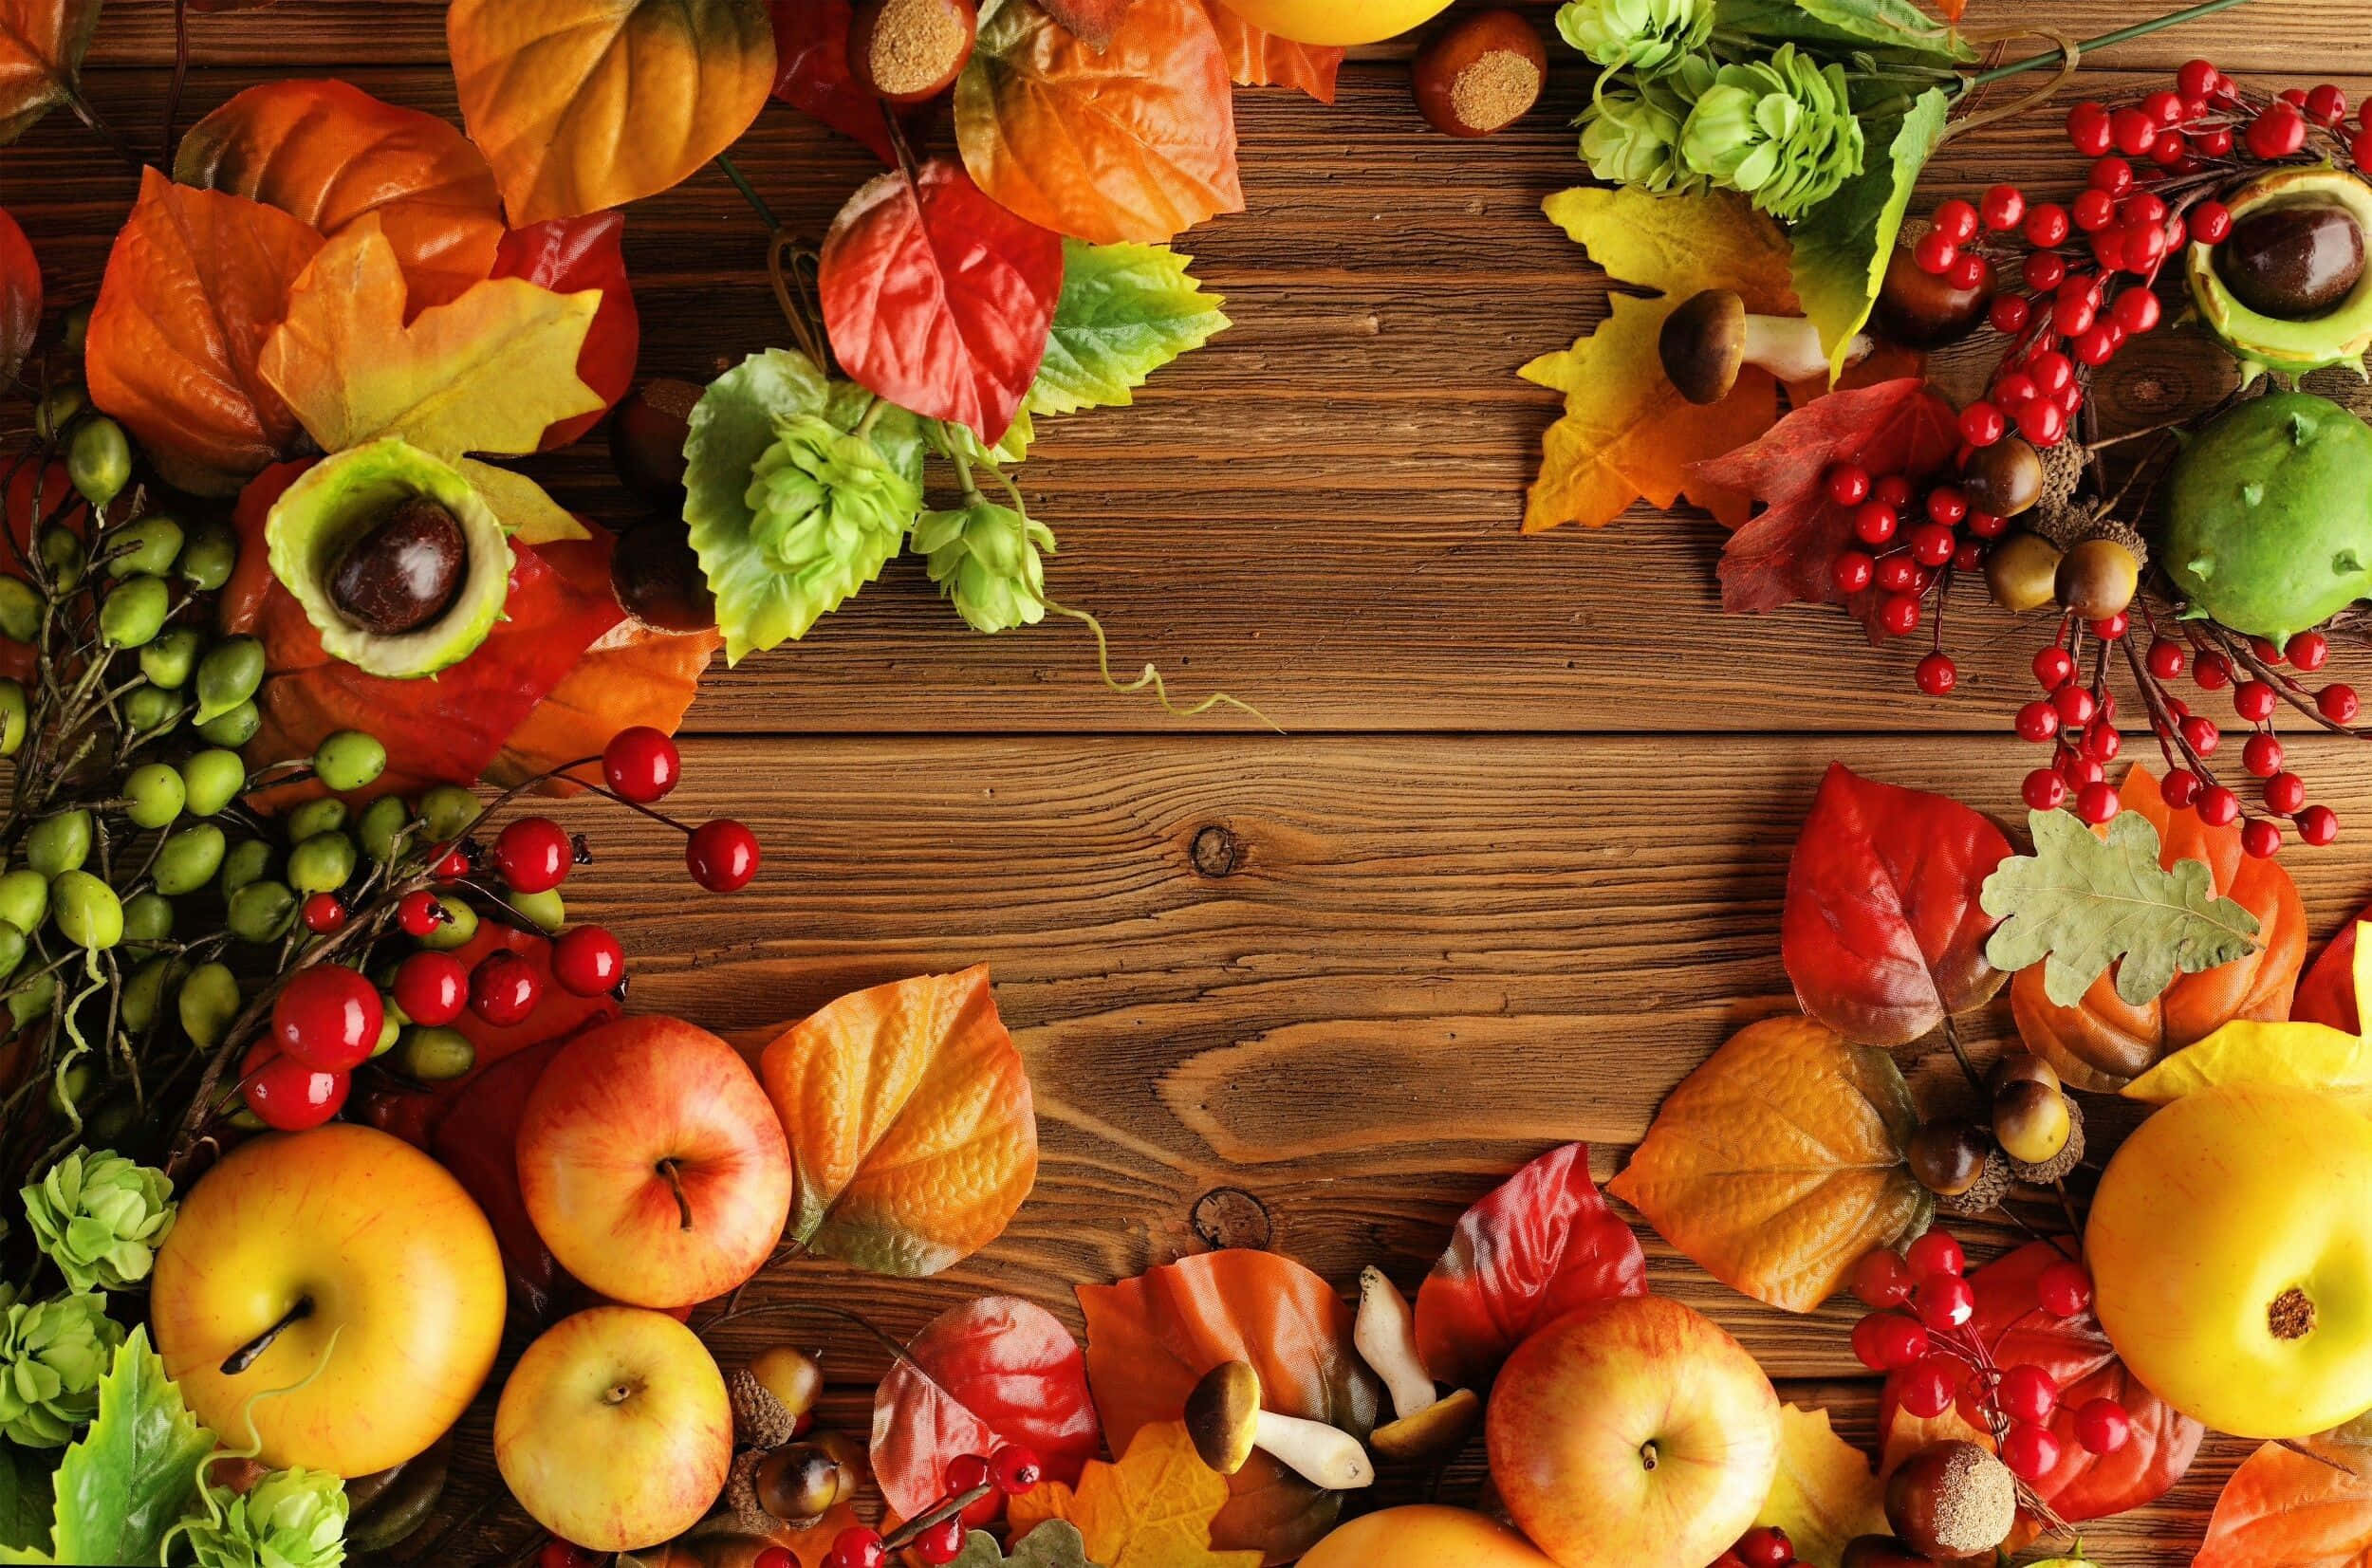 Autumn Leaves And Fruits On A Wooden Table